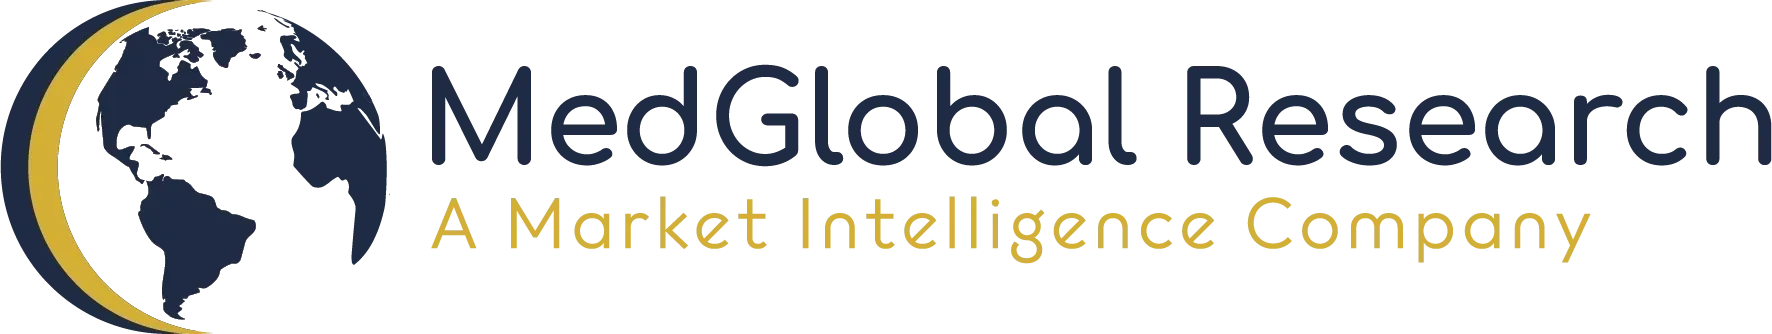 A black and yellow logo for global market intelligence.